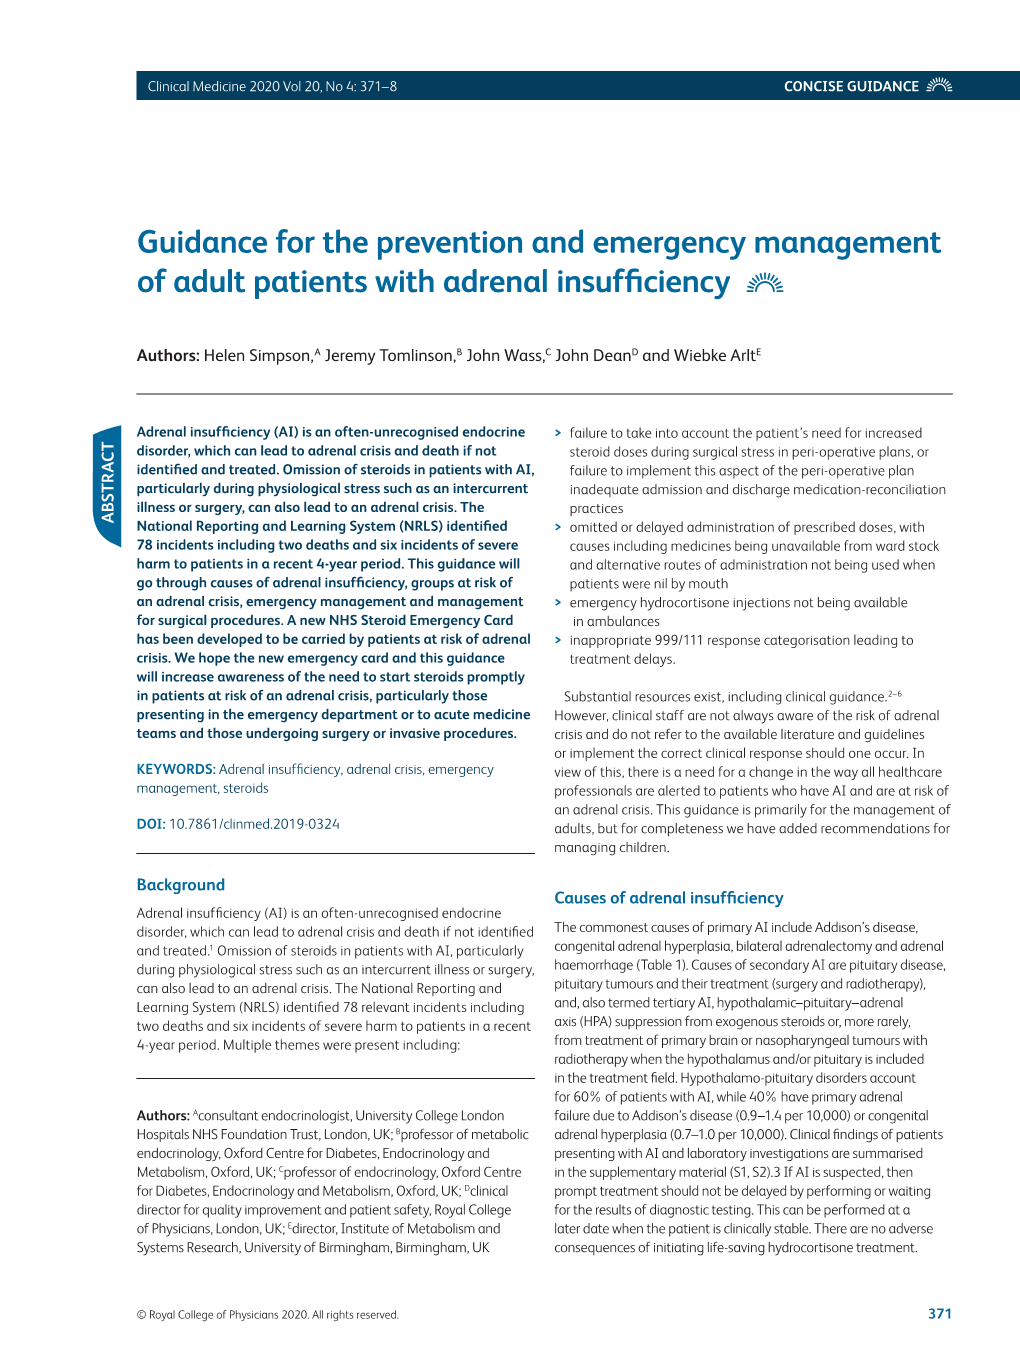 Guidance for the Prevention and Emergency Management of Adult Patients with Adrenal Insufficiency